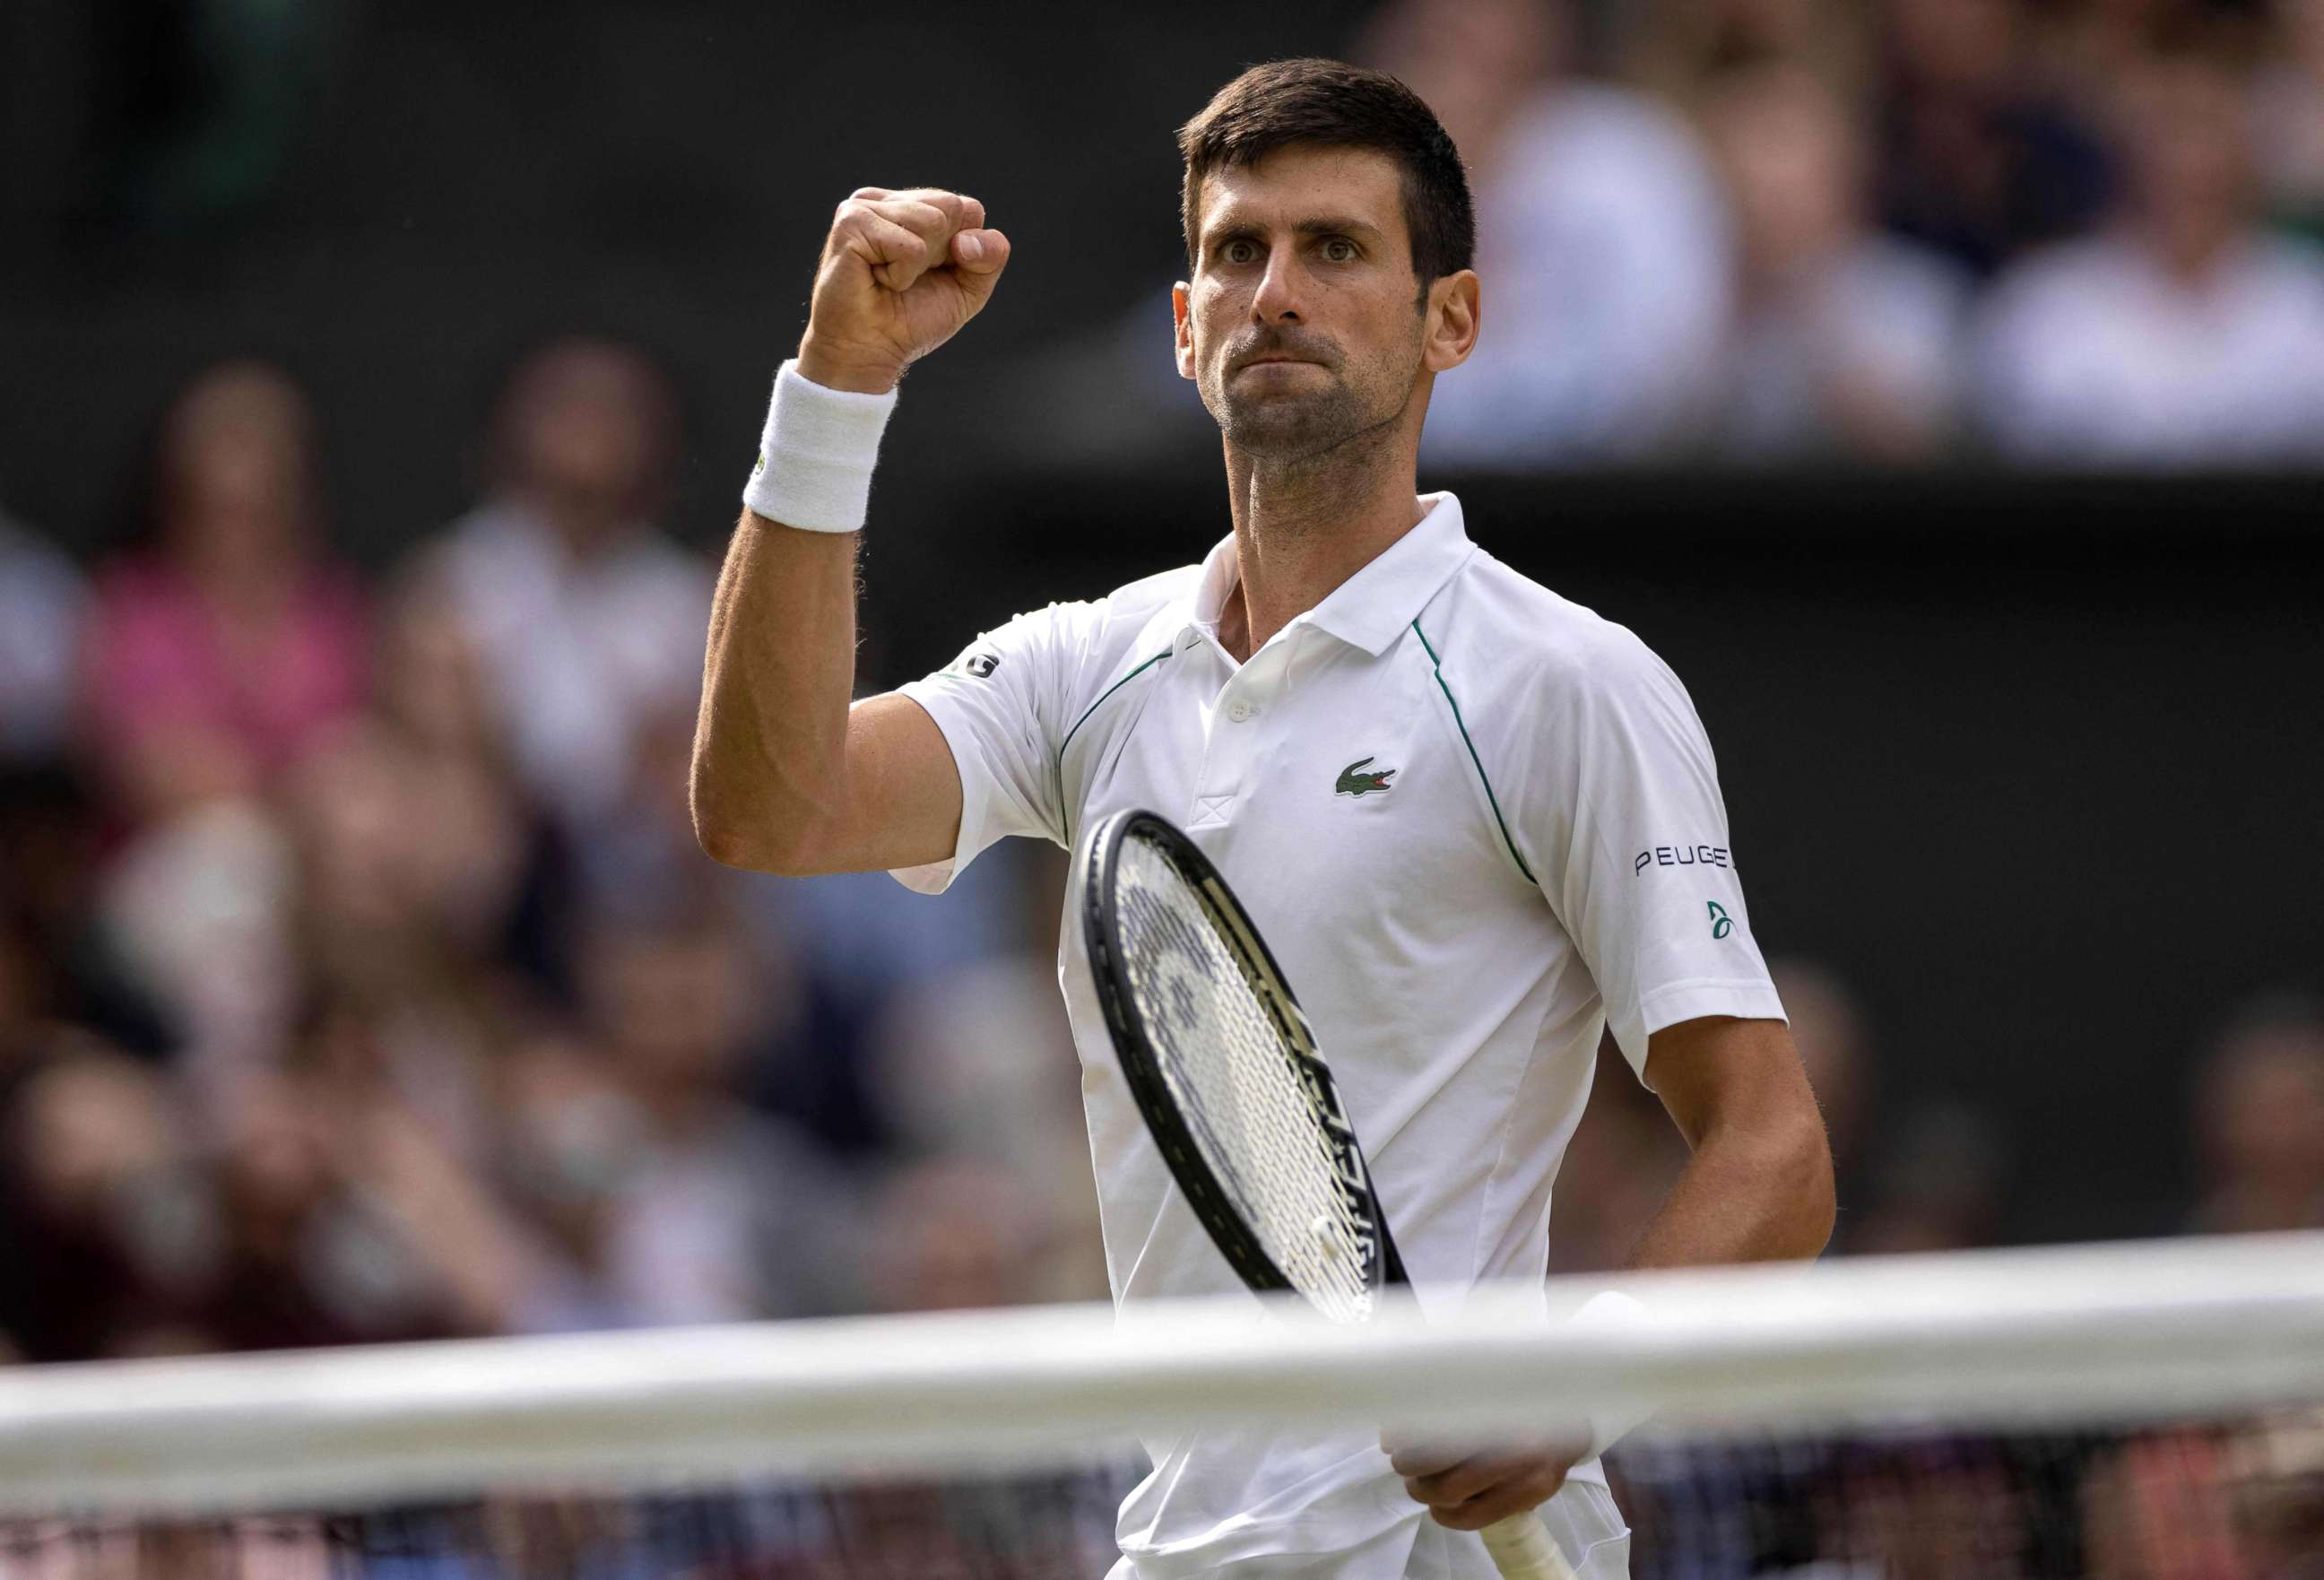 PHOTO: Novak Djokovic celebrates winning against Italy's Matteo Berrettini during their men's singles final match on the thirteenth day of the 2021 Wimbledon Championships at The All England Tennis Club in London, July 11, 2021.